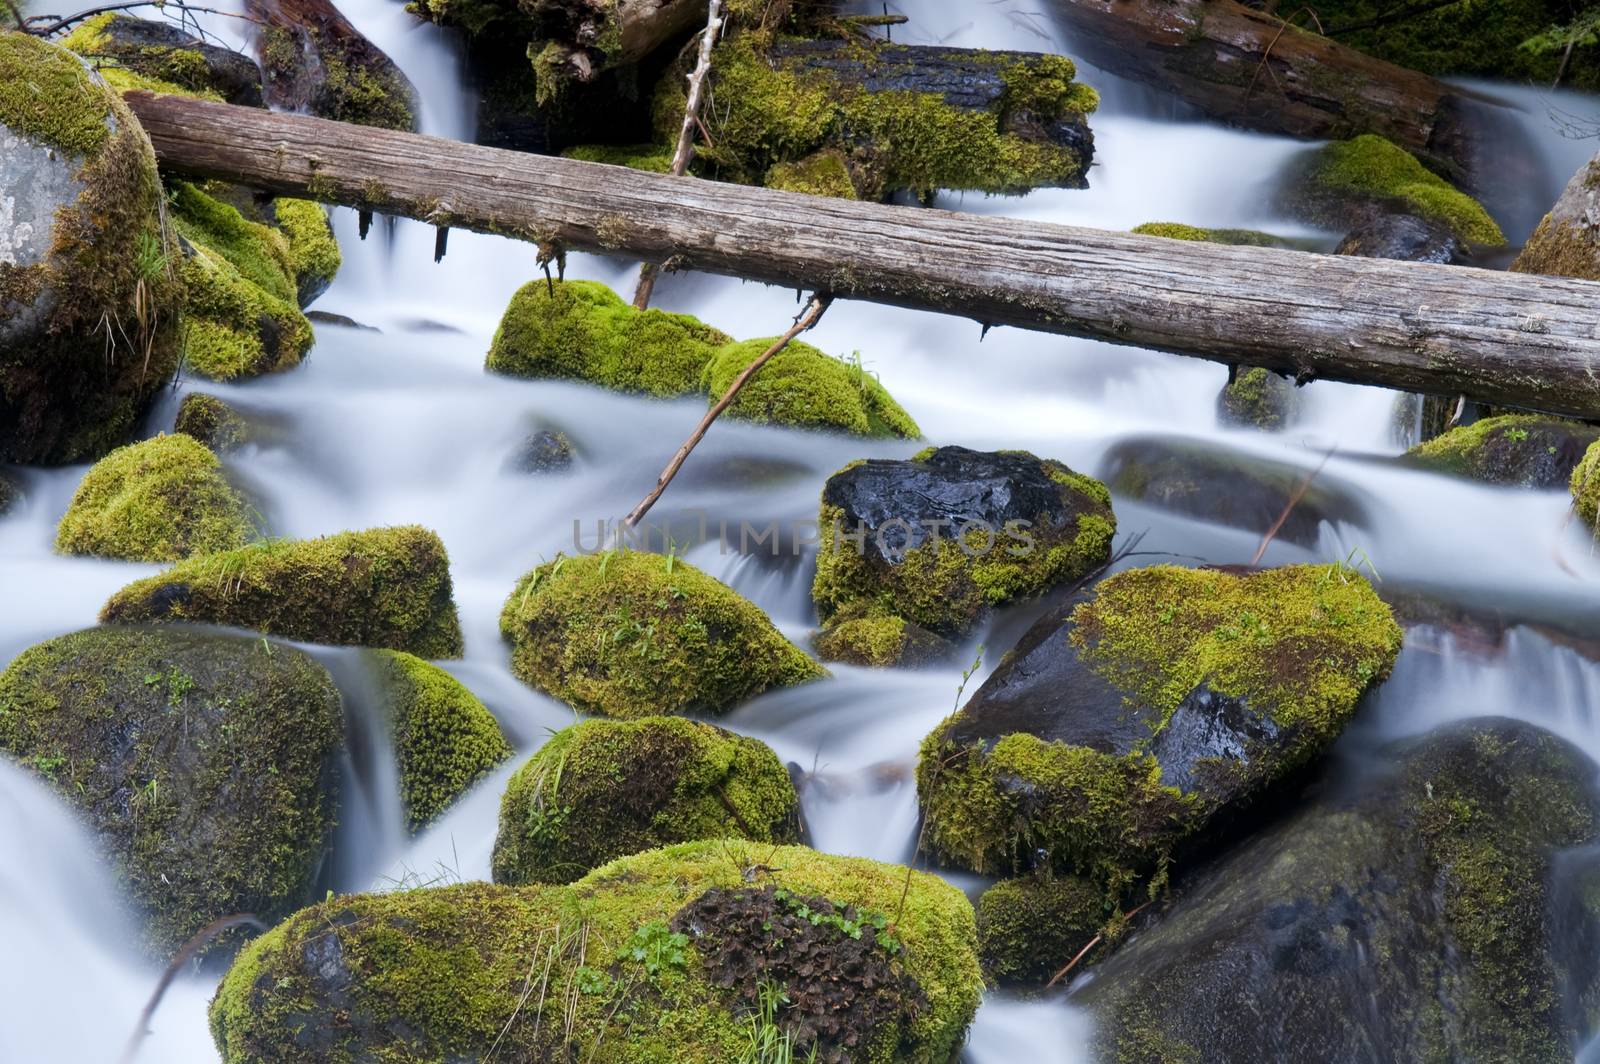 Moss Filled Boulders Fill Stream as Water Rushes By by ChrisBoswell